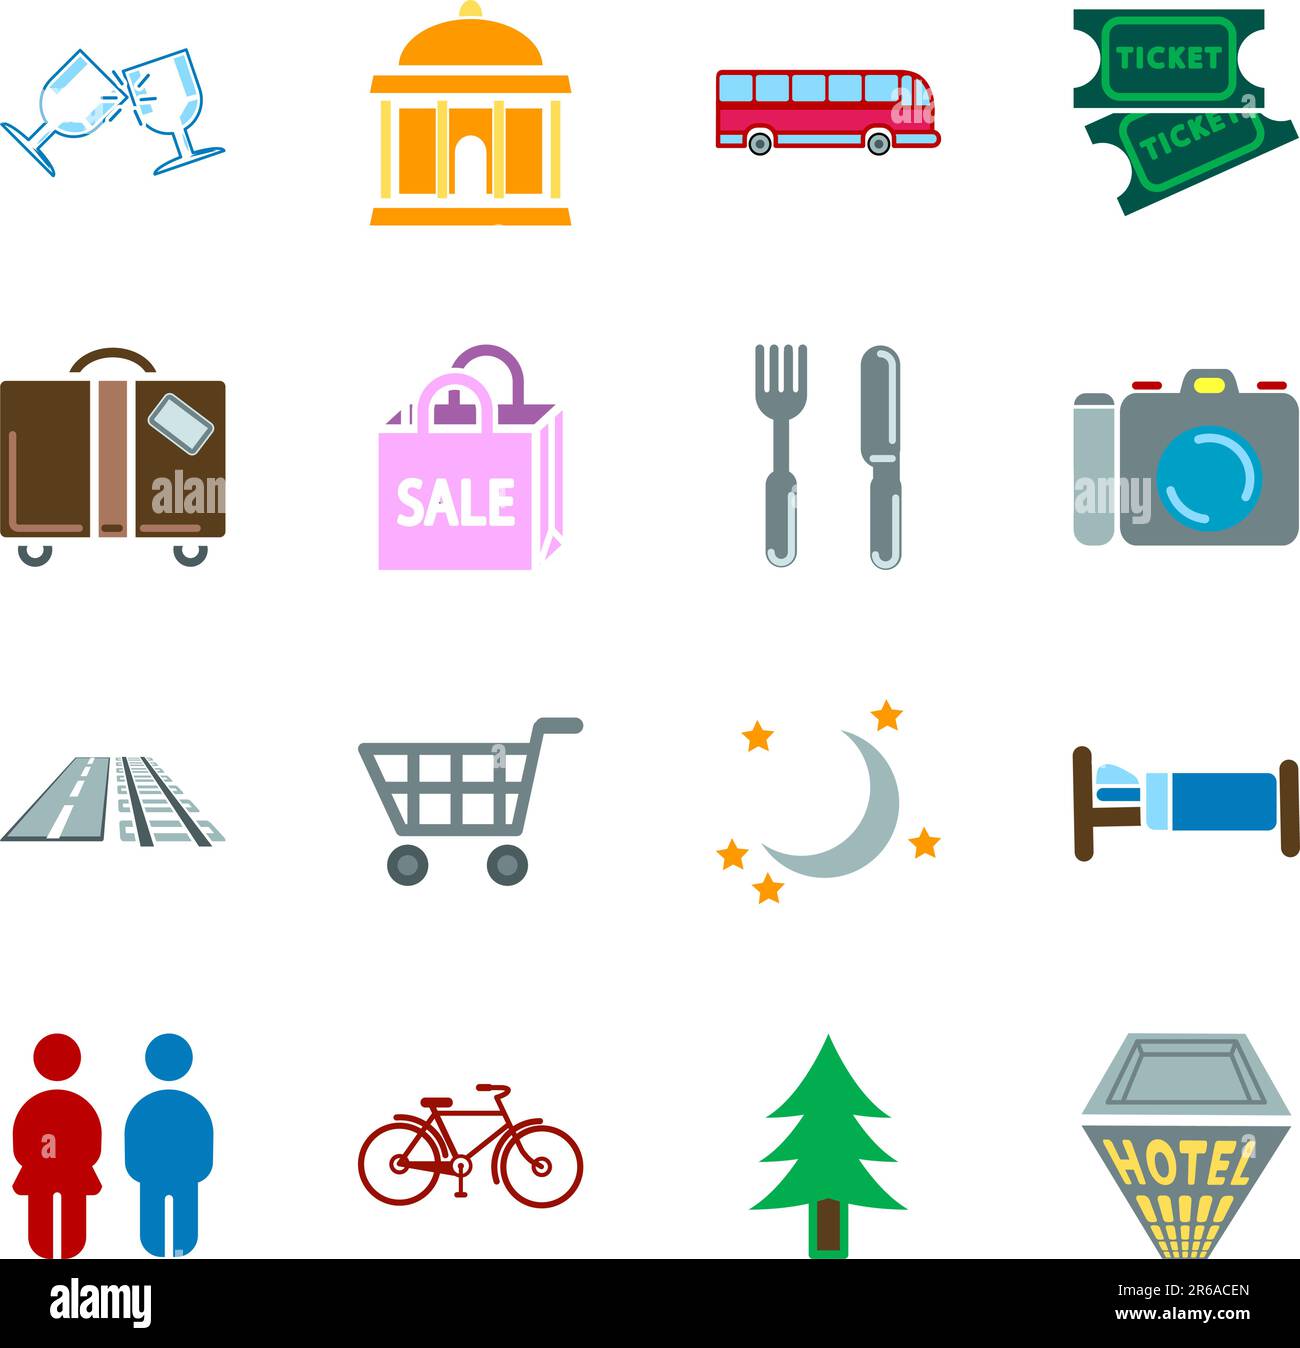 Icon set relating to city or location information for tourist web sites or maps etc. Stock Vector